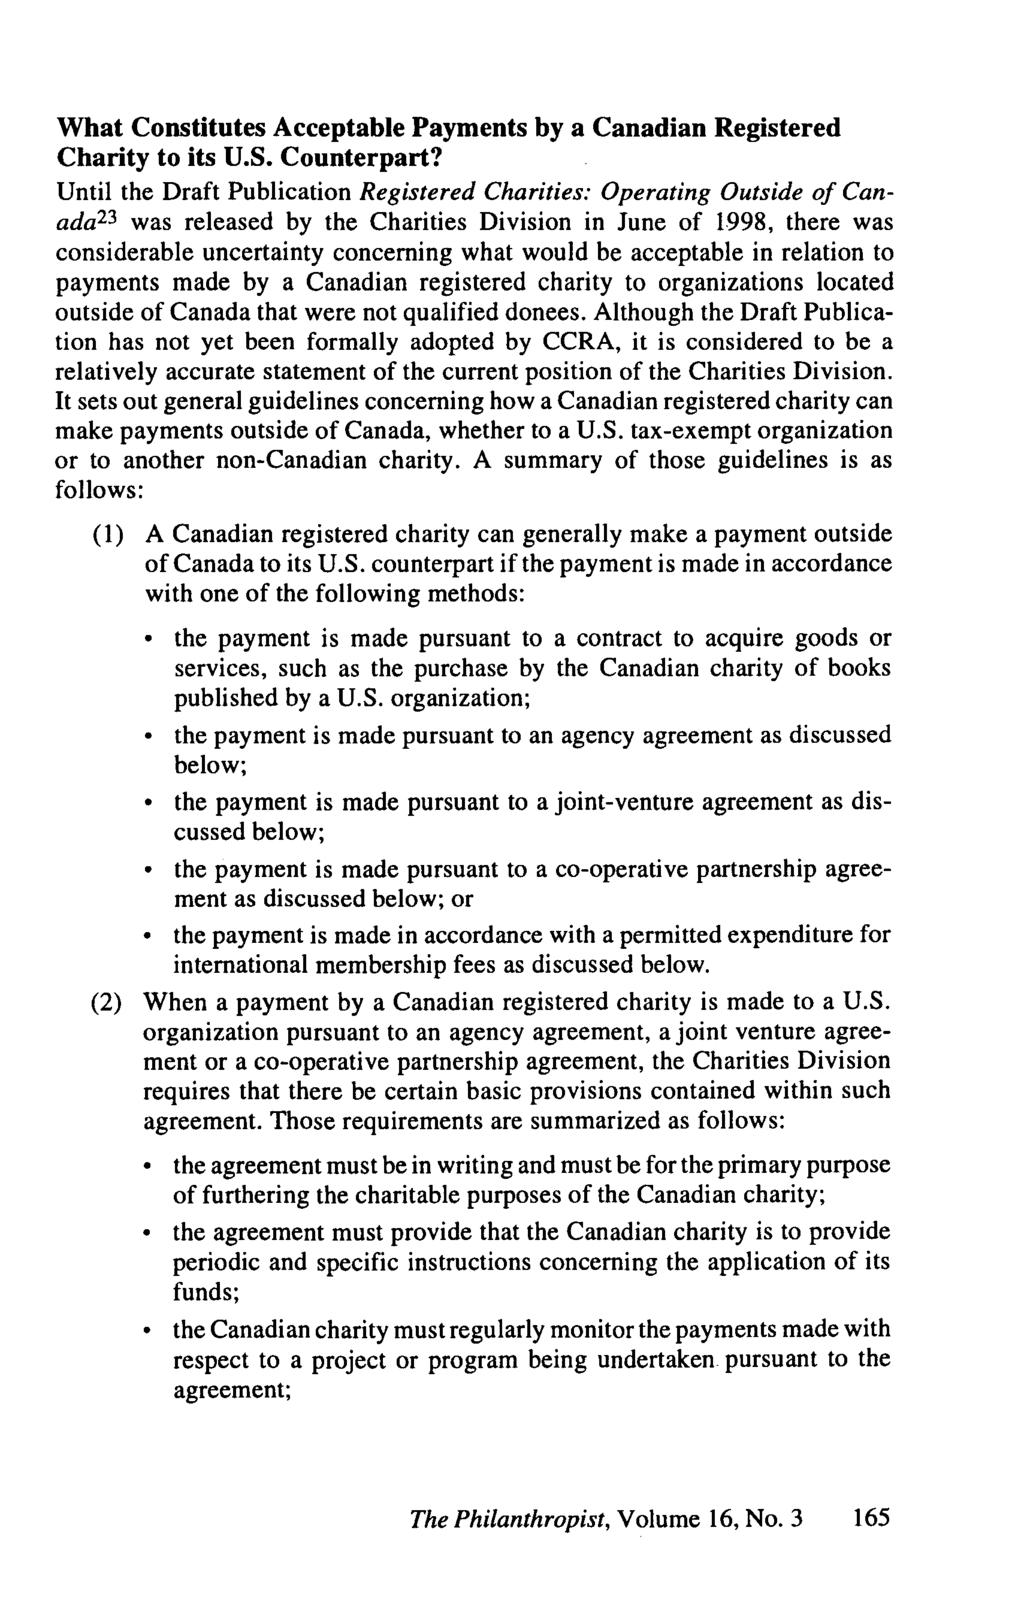 What Constitutes Acceptable Payments by a Canadian Registered Charity to its U.S. Counterpart?